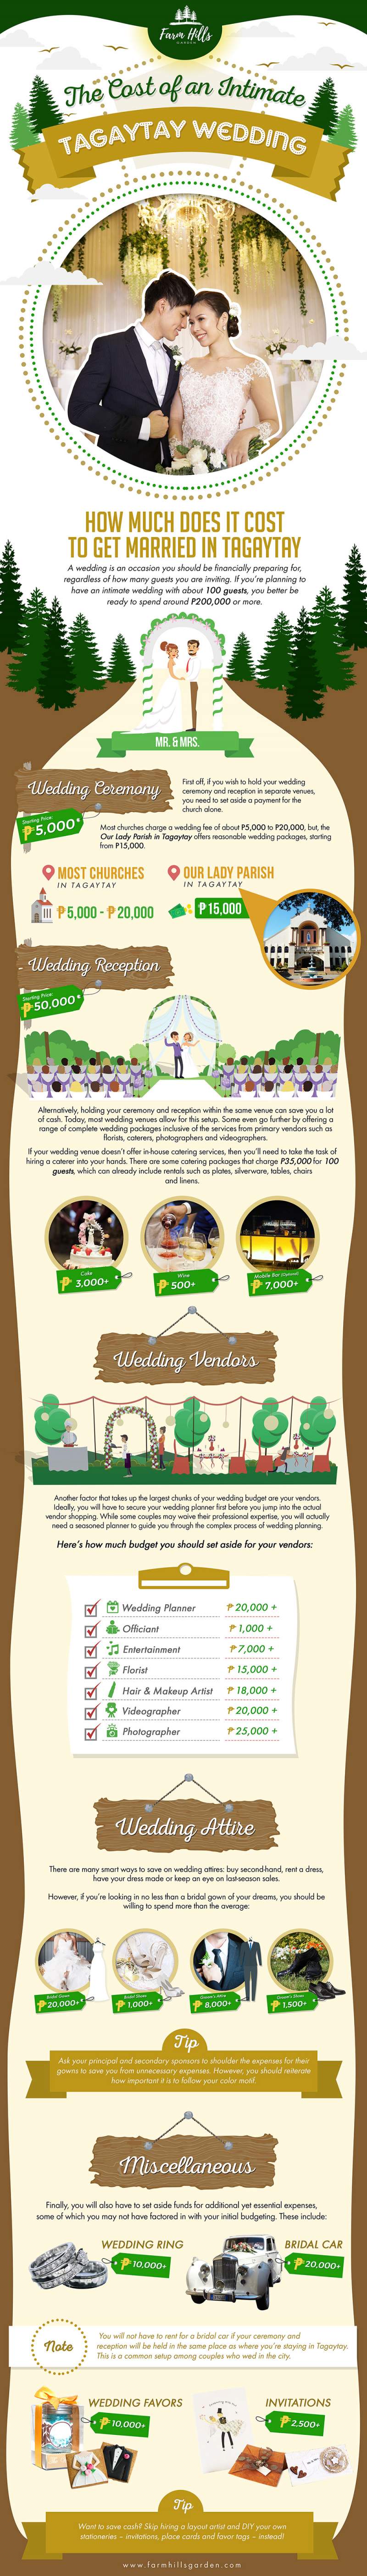 Cost of an Intimate Tagaytay Wedding